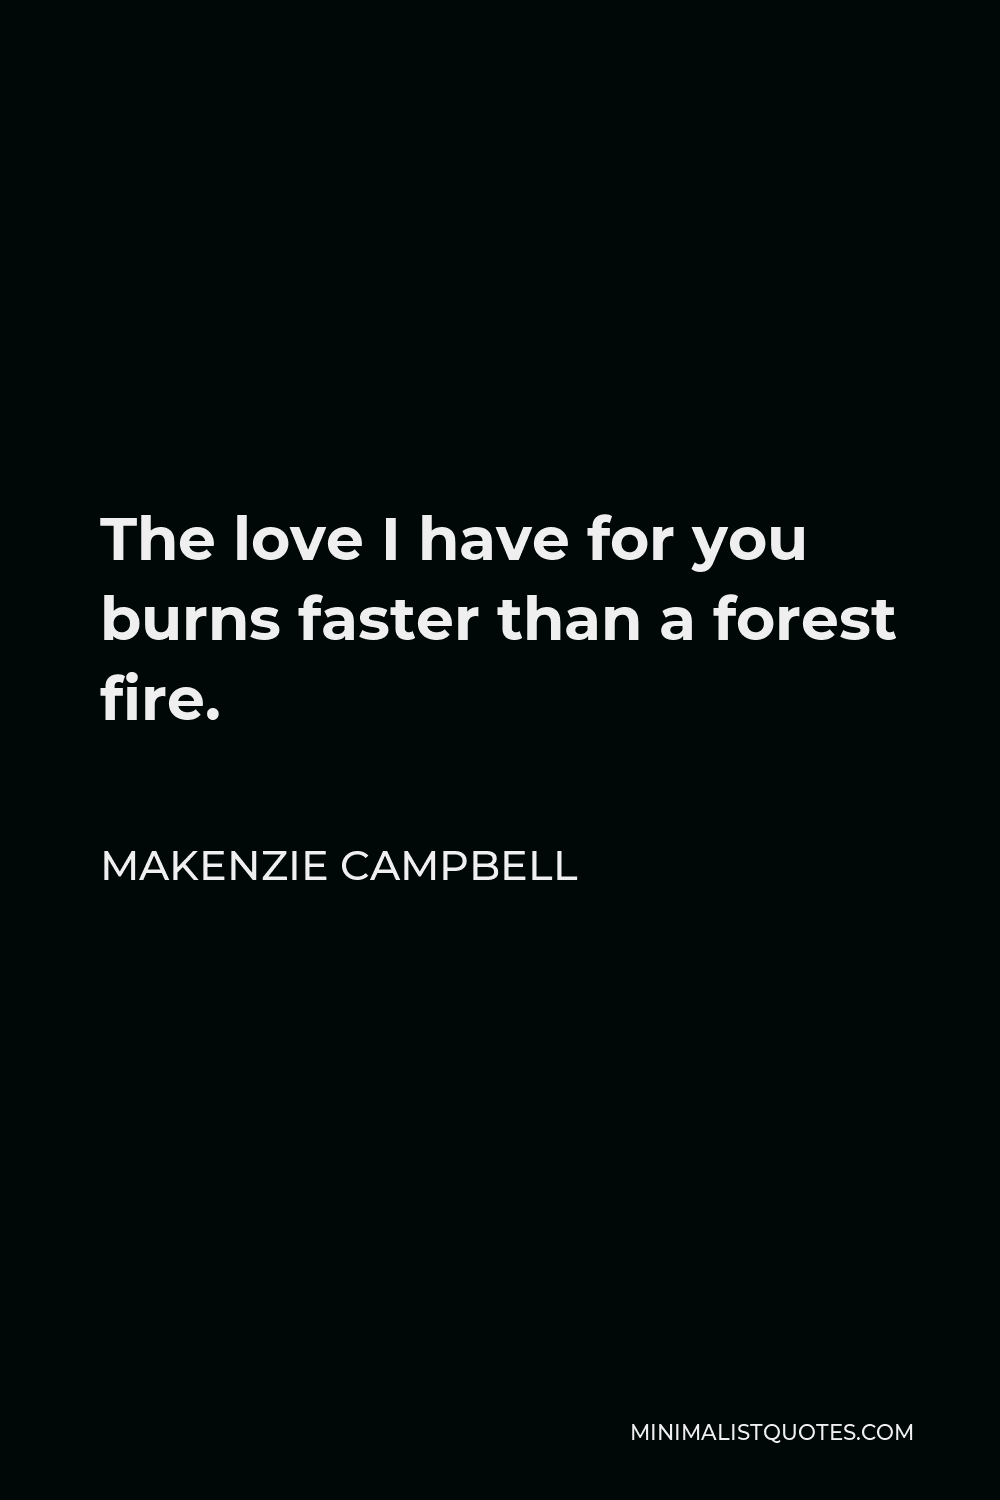 Makenzie Campbell Quote - The love I have for you burns faster than a forest fire.